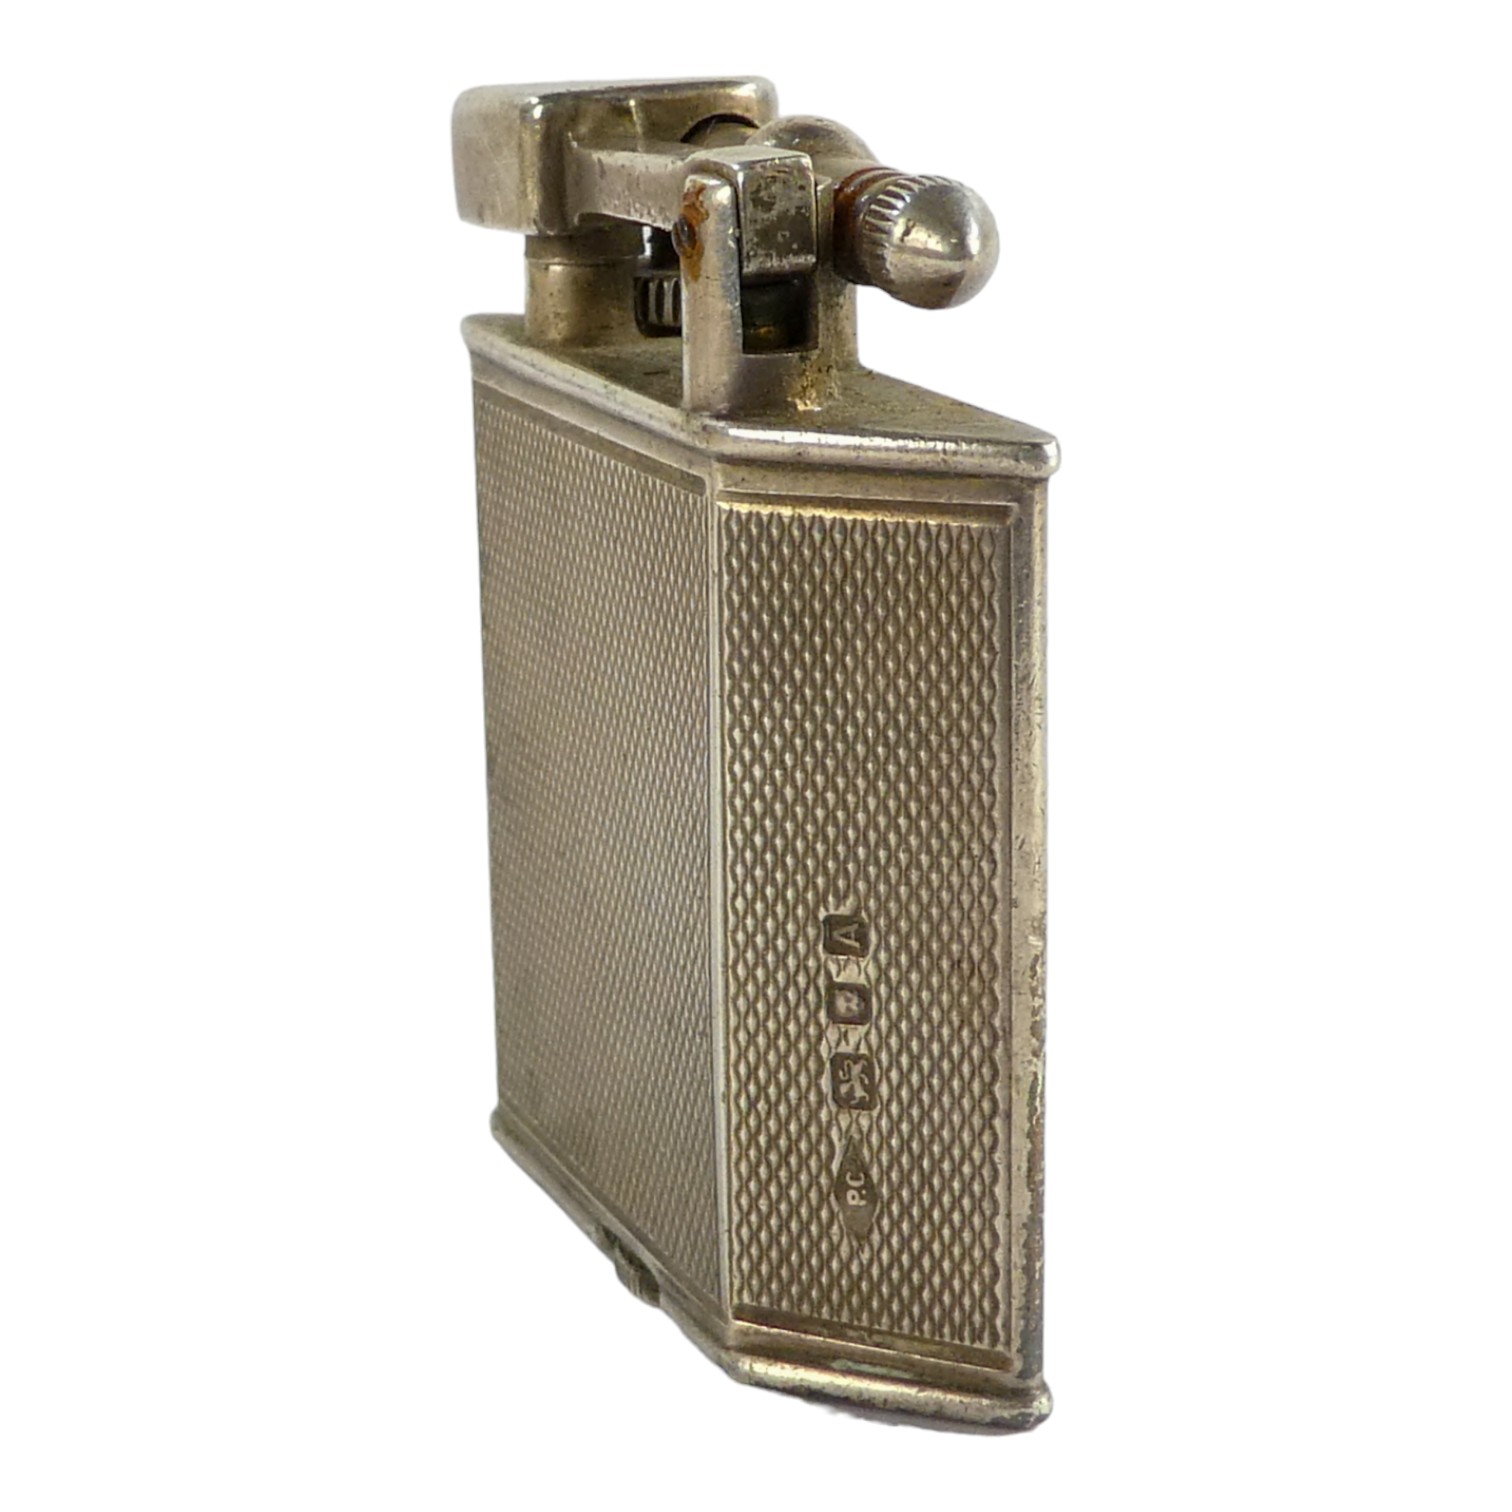 An Art Deco style Parker Beacon silver cigarette lighter - London 1936, Parker Pipe Co, rhombus - Image 11 of 15